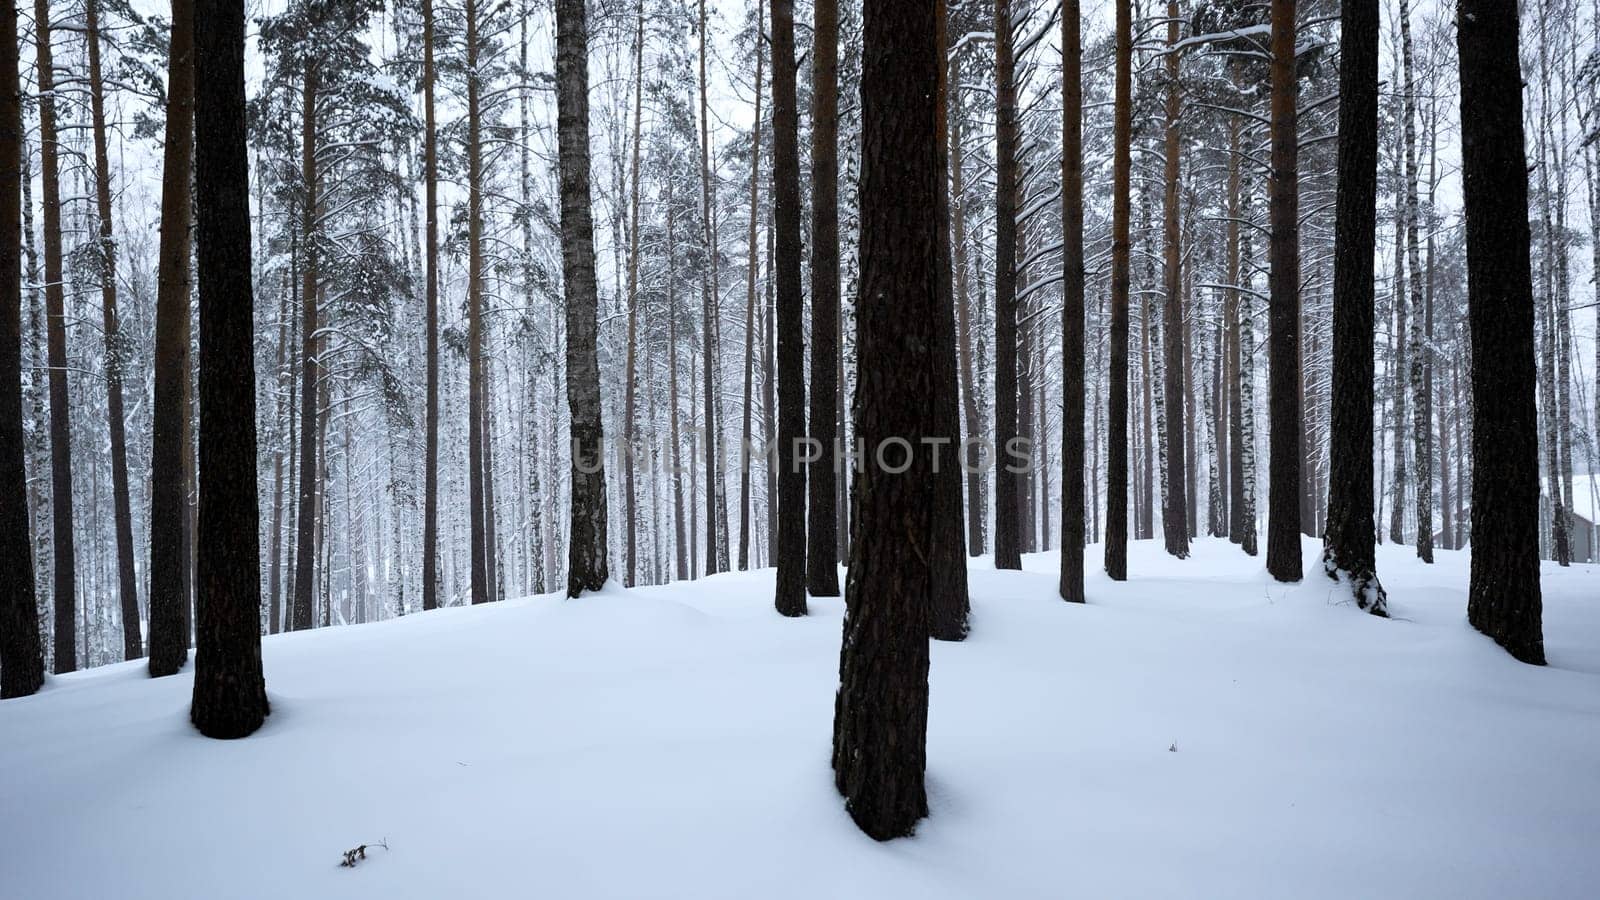 Winter landscape with pine trees covered with snow in white forest. Media. Fairytale winter forest during snowfall